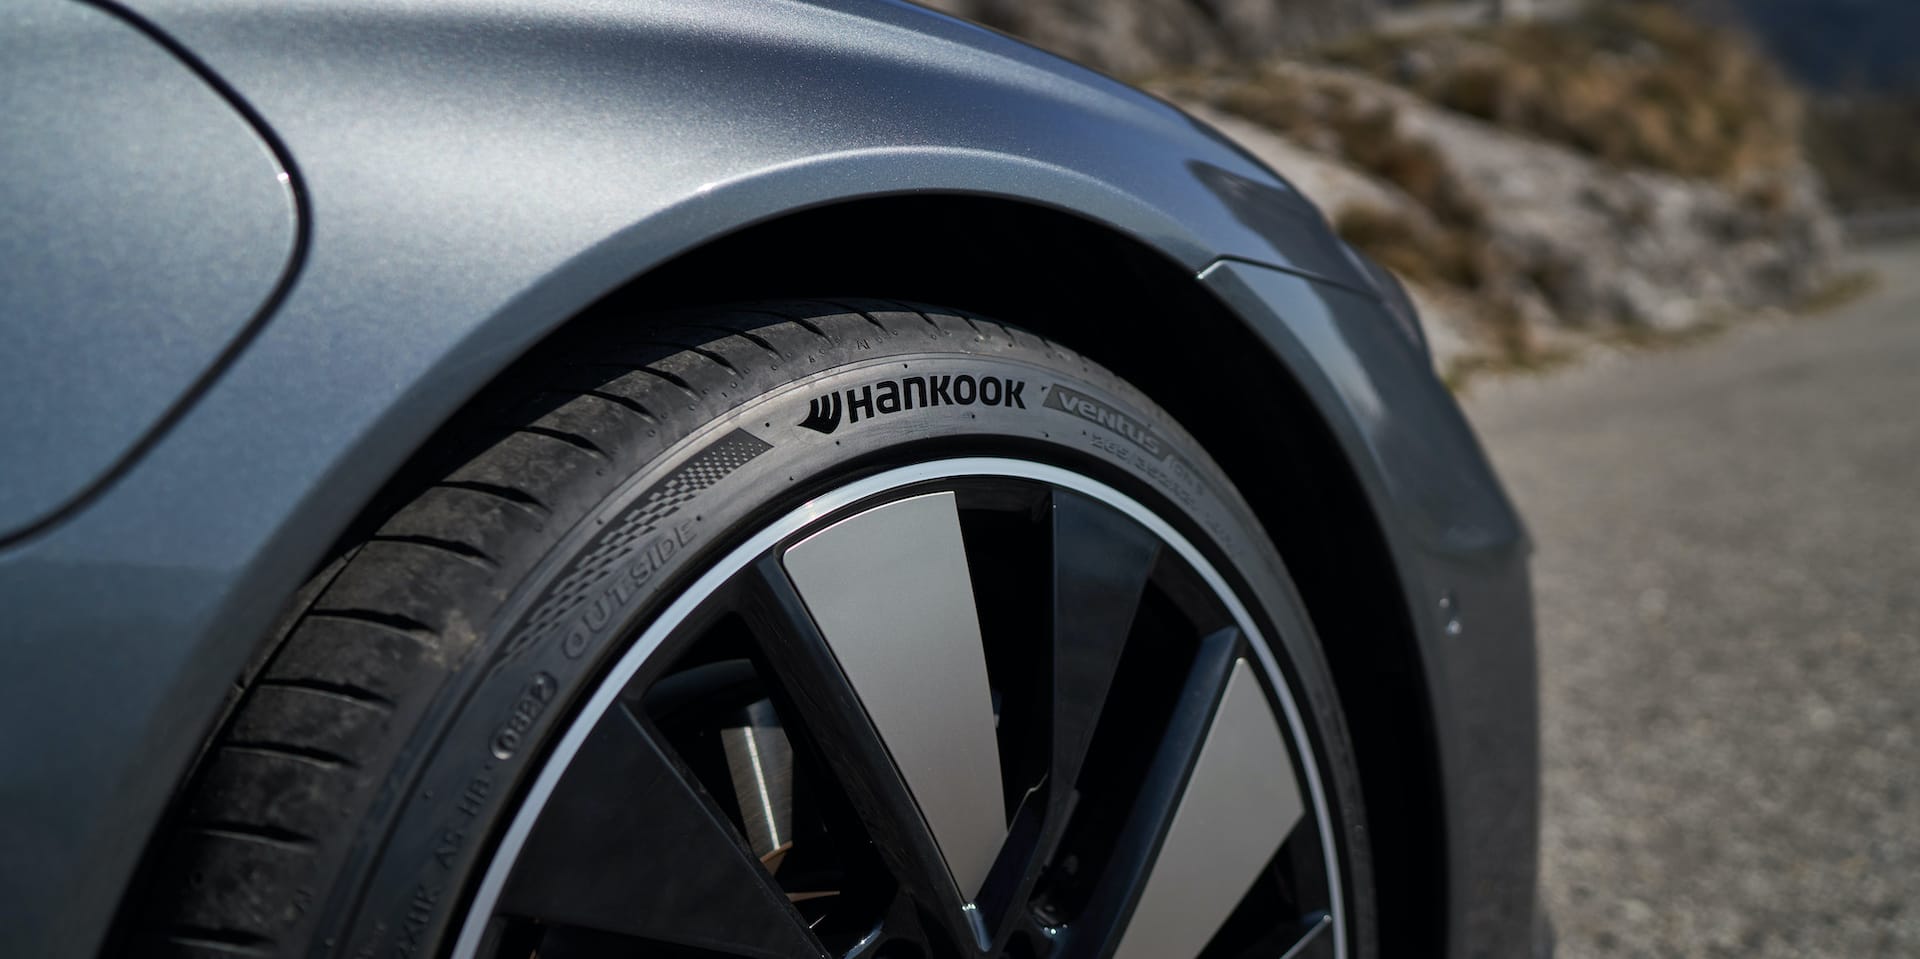 Do electric cars need special tyres? Hankook Ventus iON tyre